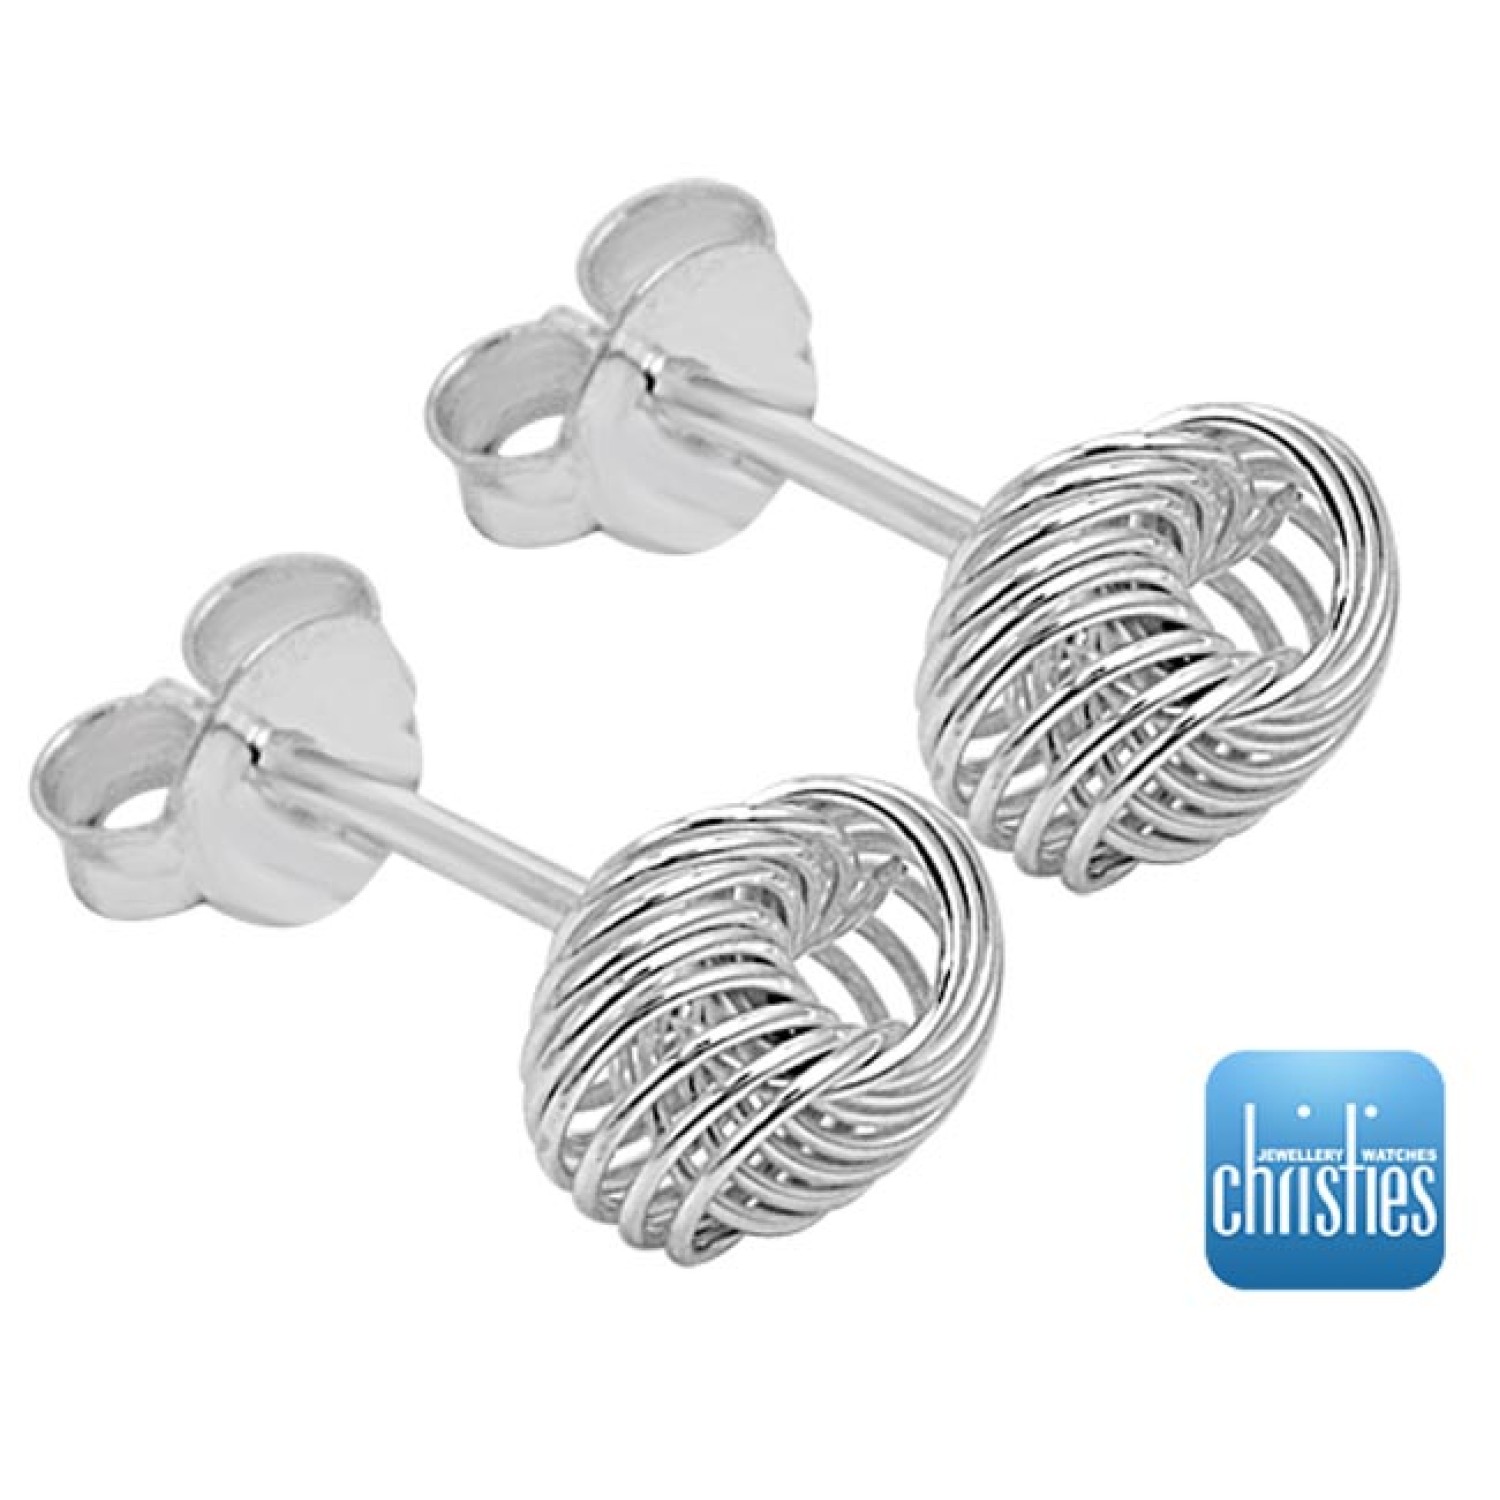 Silver Wool Knot BKKEZK. Crafted in 925 Sterling silver  It is Hypoallergenic - i.e. does not cause allergic reactions The Earrings are  8mm in Diameter Gift Boxed 5 Year Written Guarantee OXIPAY - Have it now and pay @christies.online